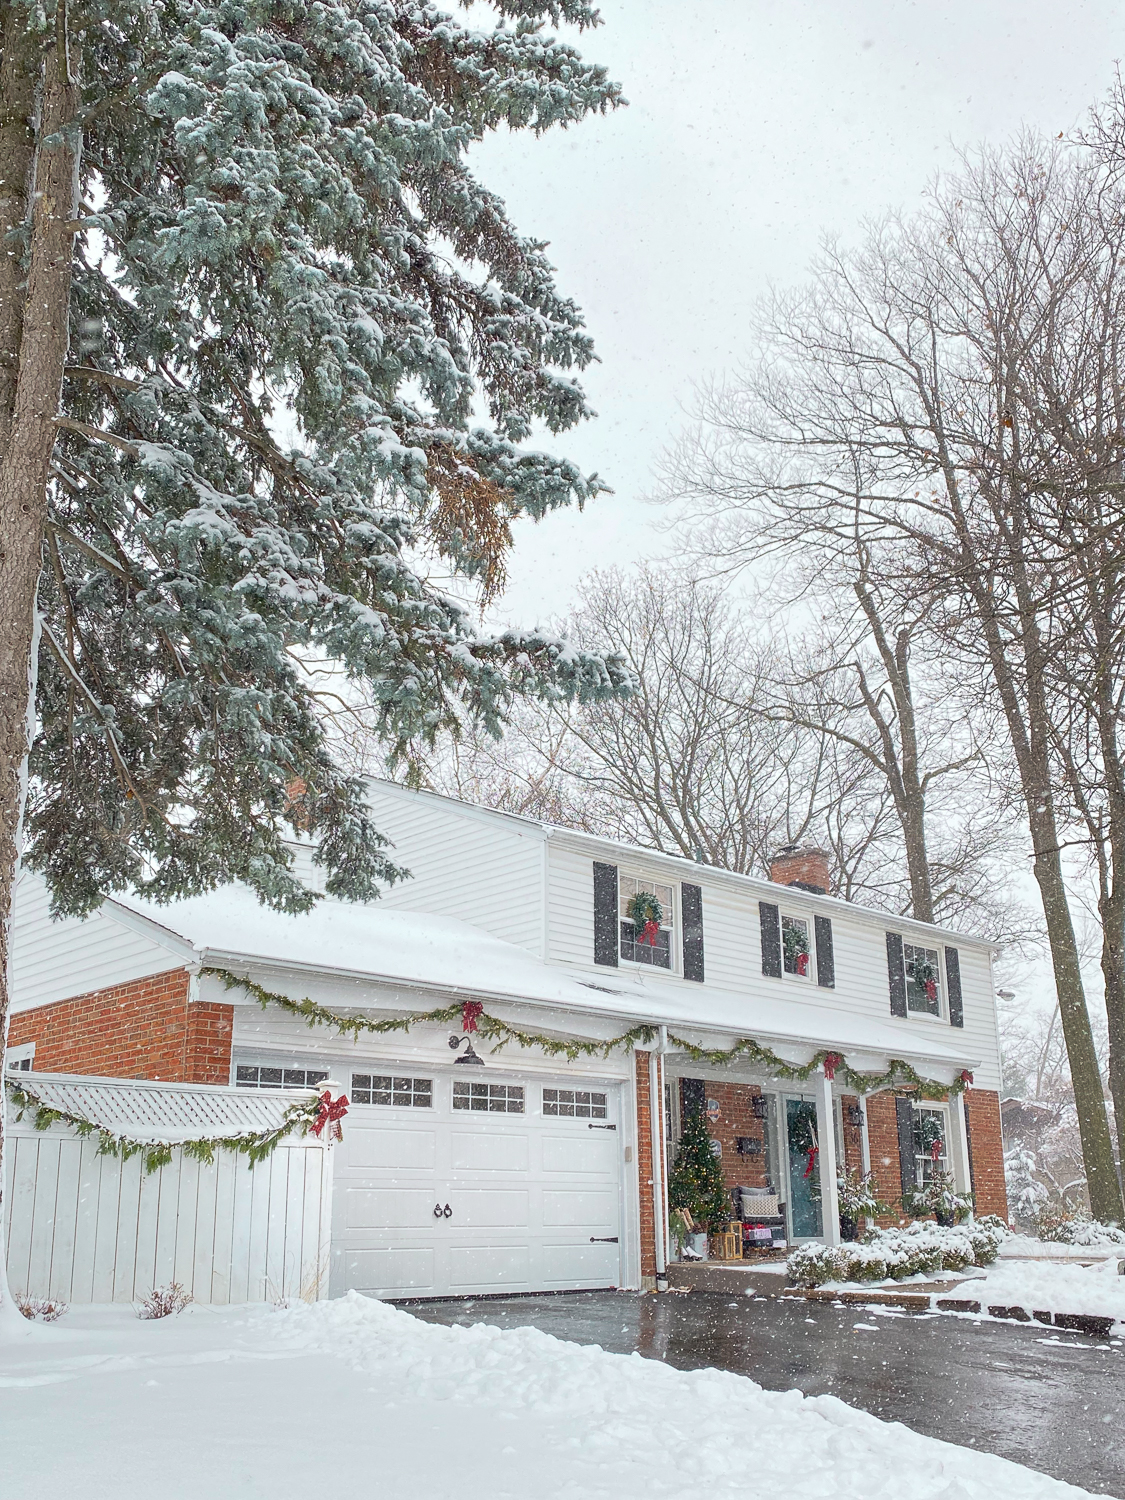 colonial house in winter, colonial house with snow, Christmas house with snow